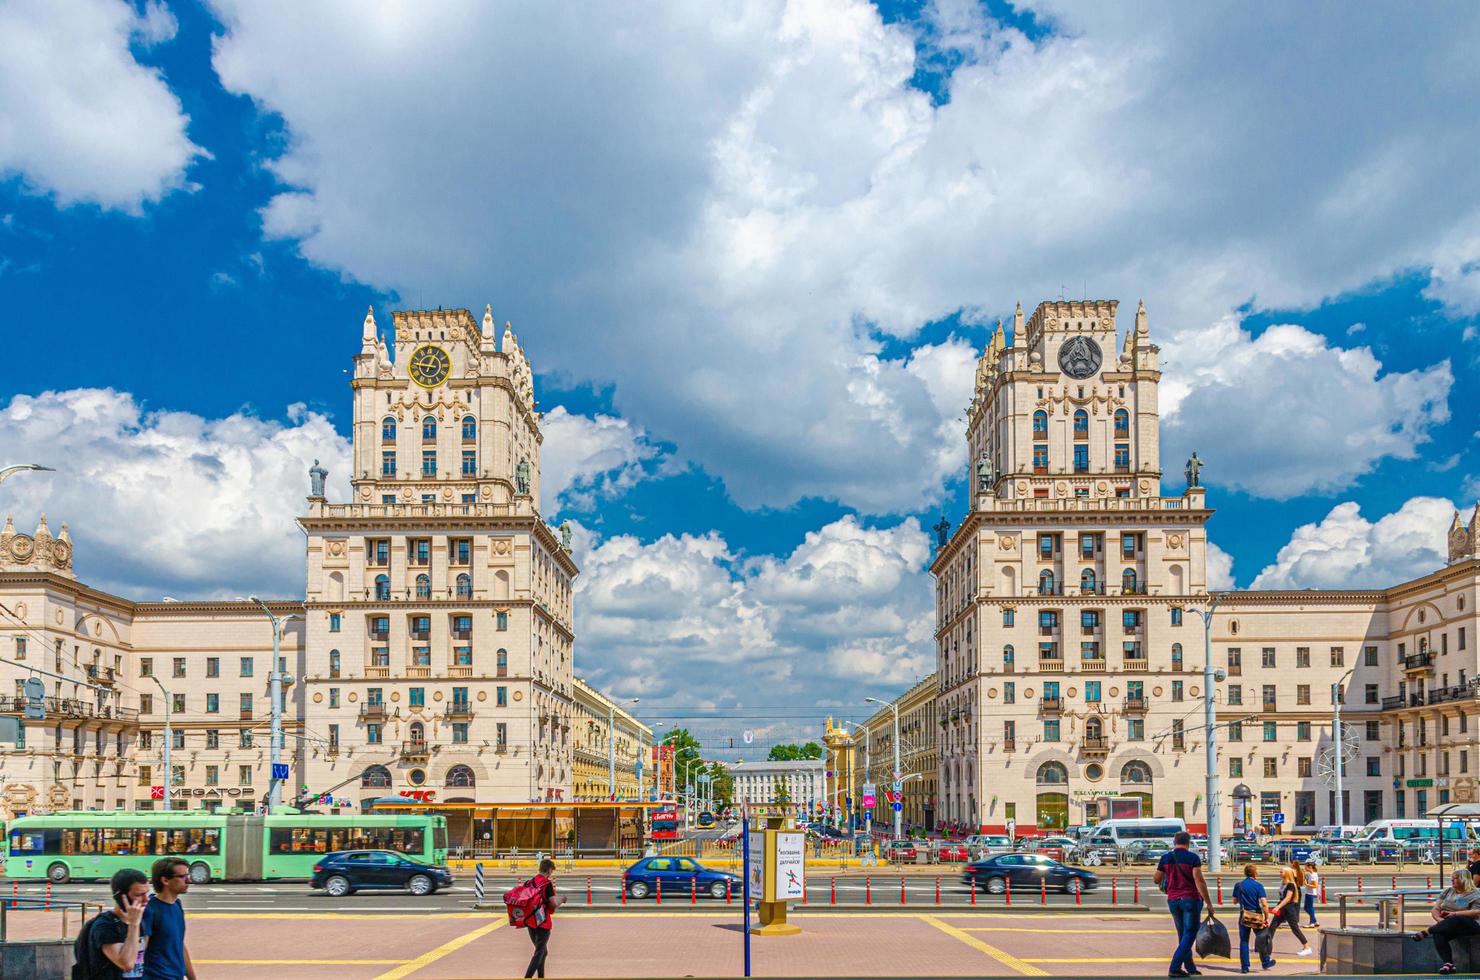 Railway Station Square with The Gates of Minsk two tall towers photo